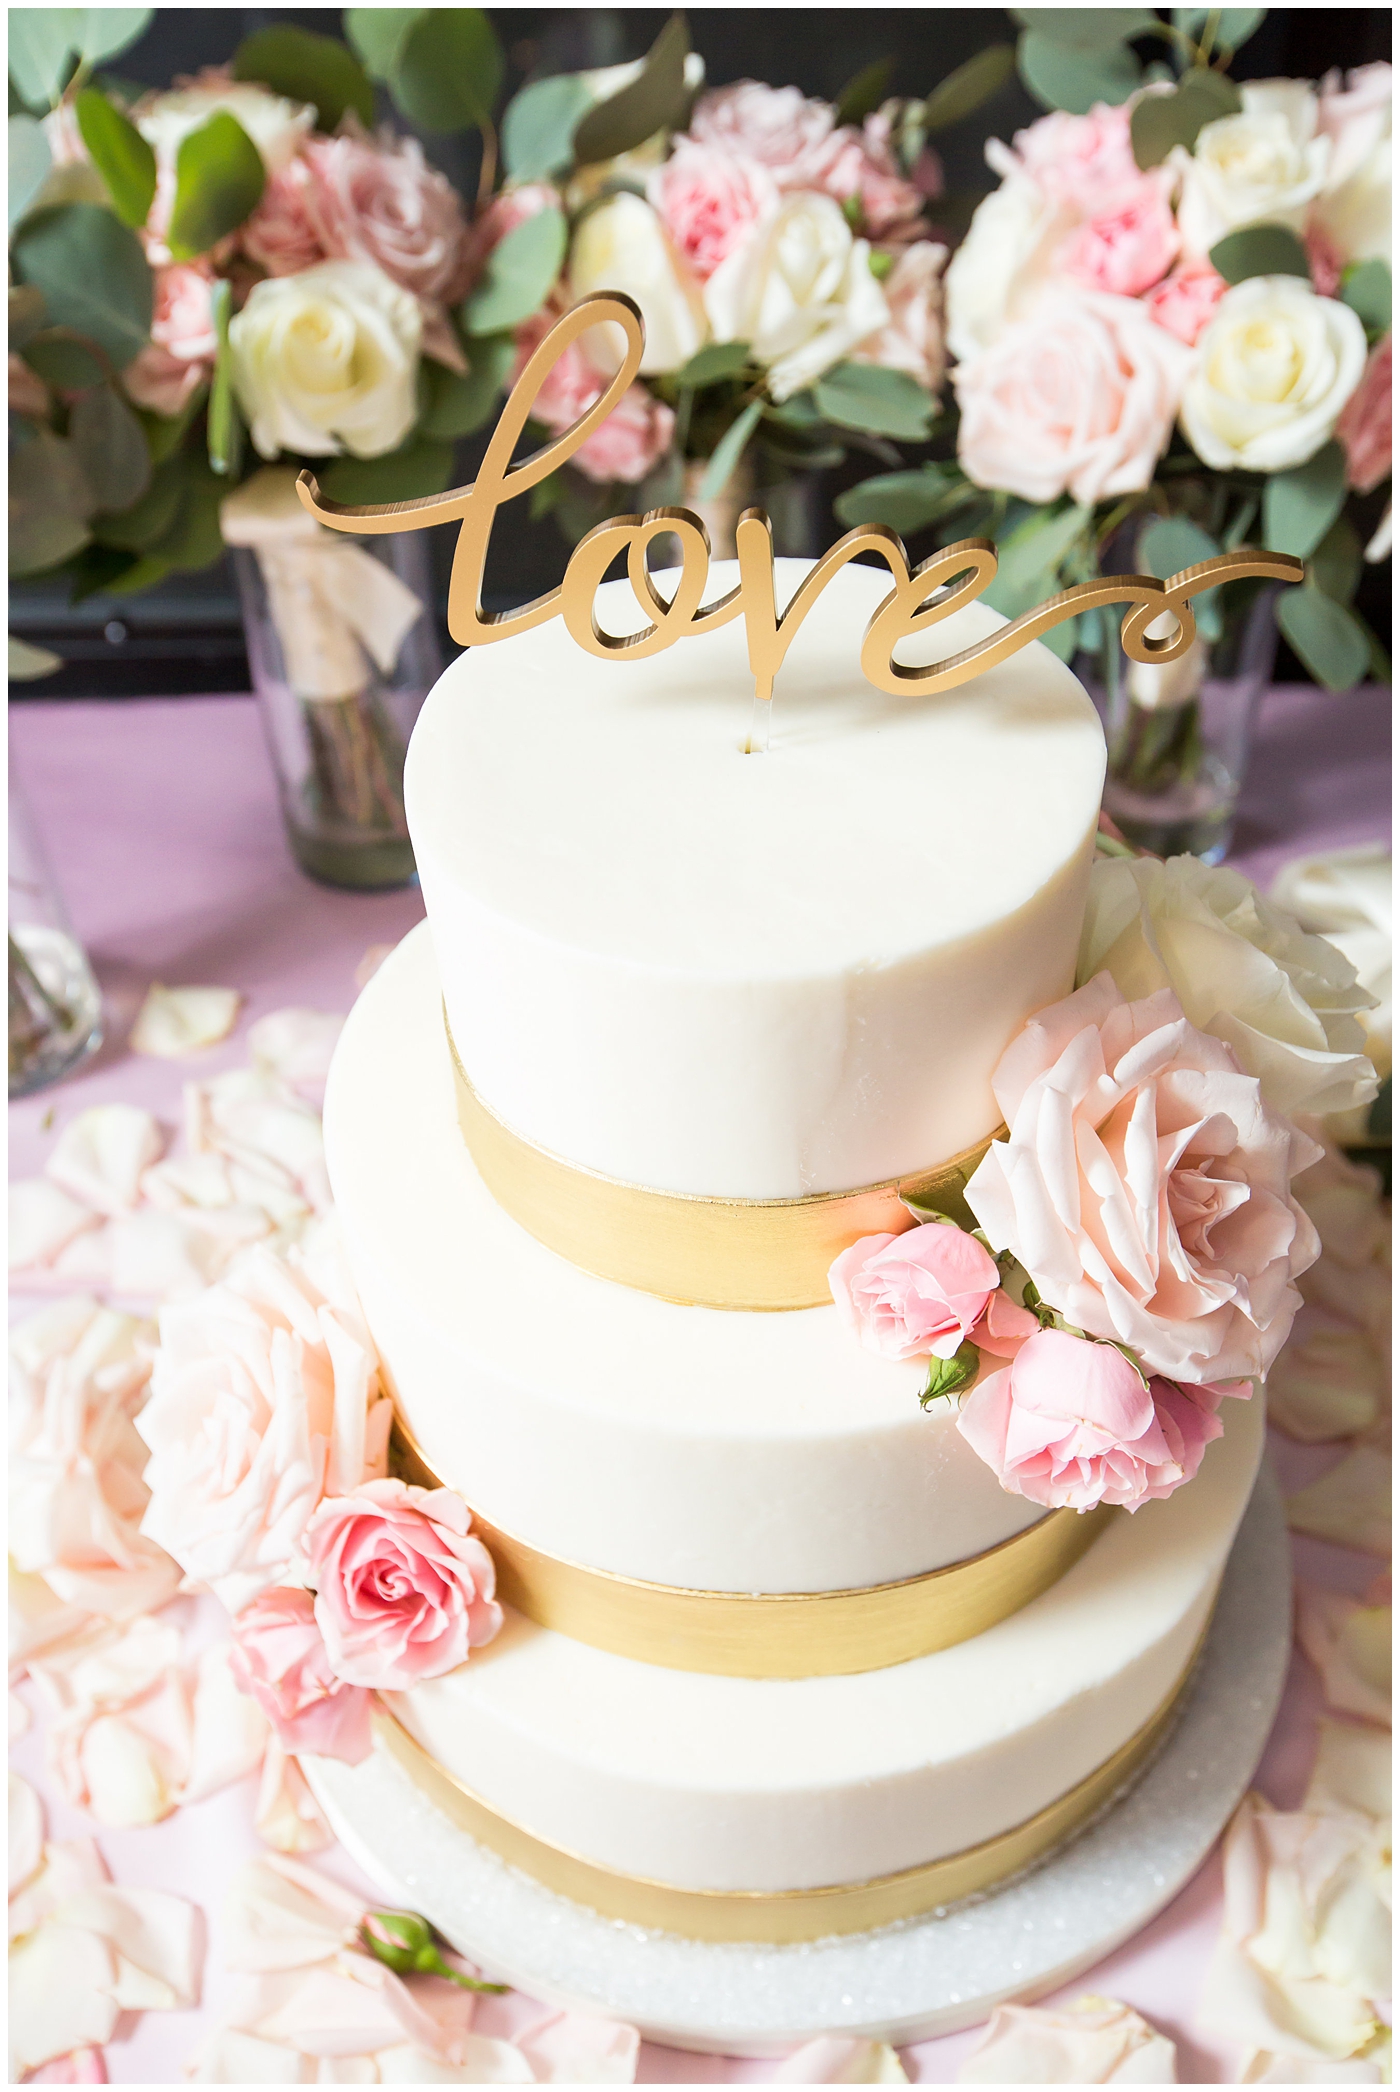 white smooth three tier wedding cake with gold ribbon and gold love cutout wedding cake topper at reception